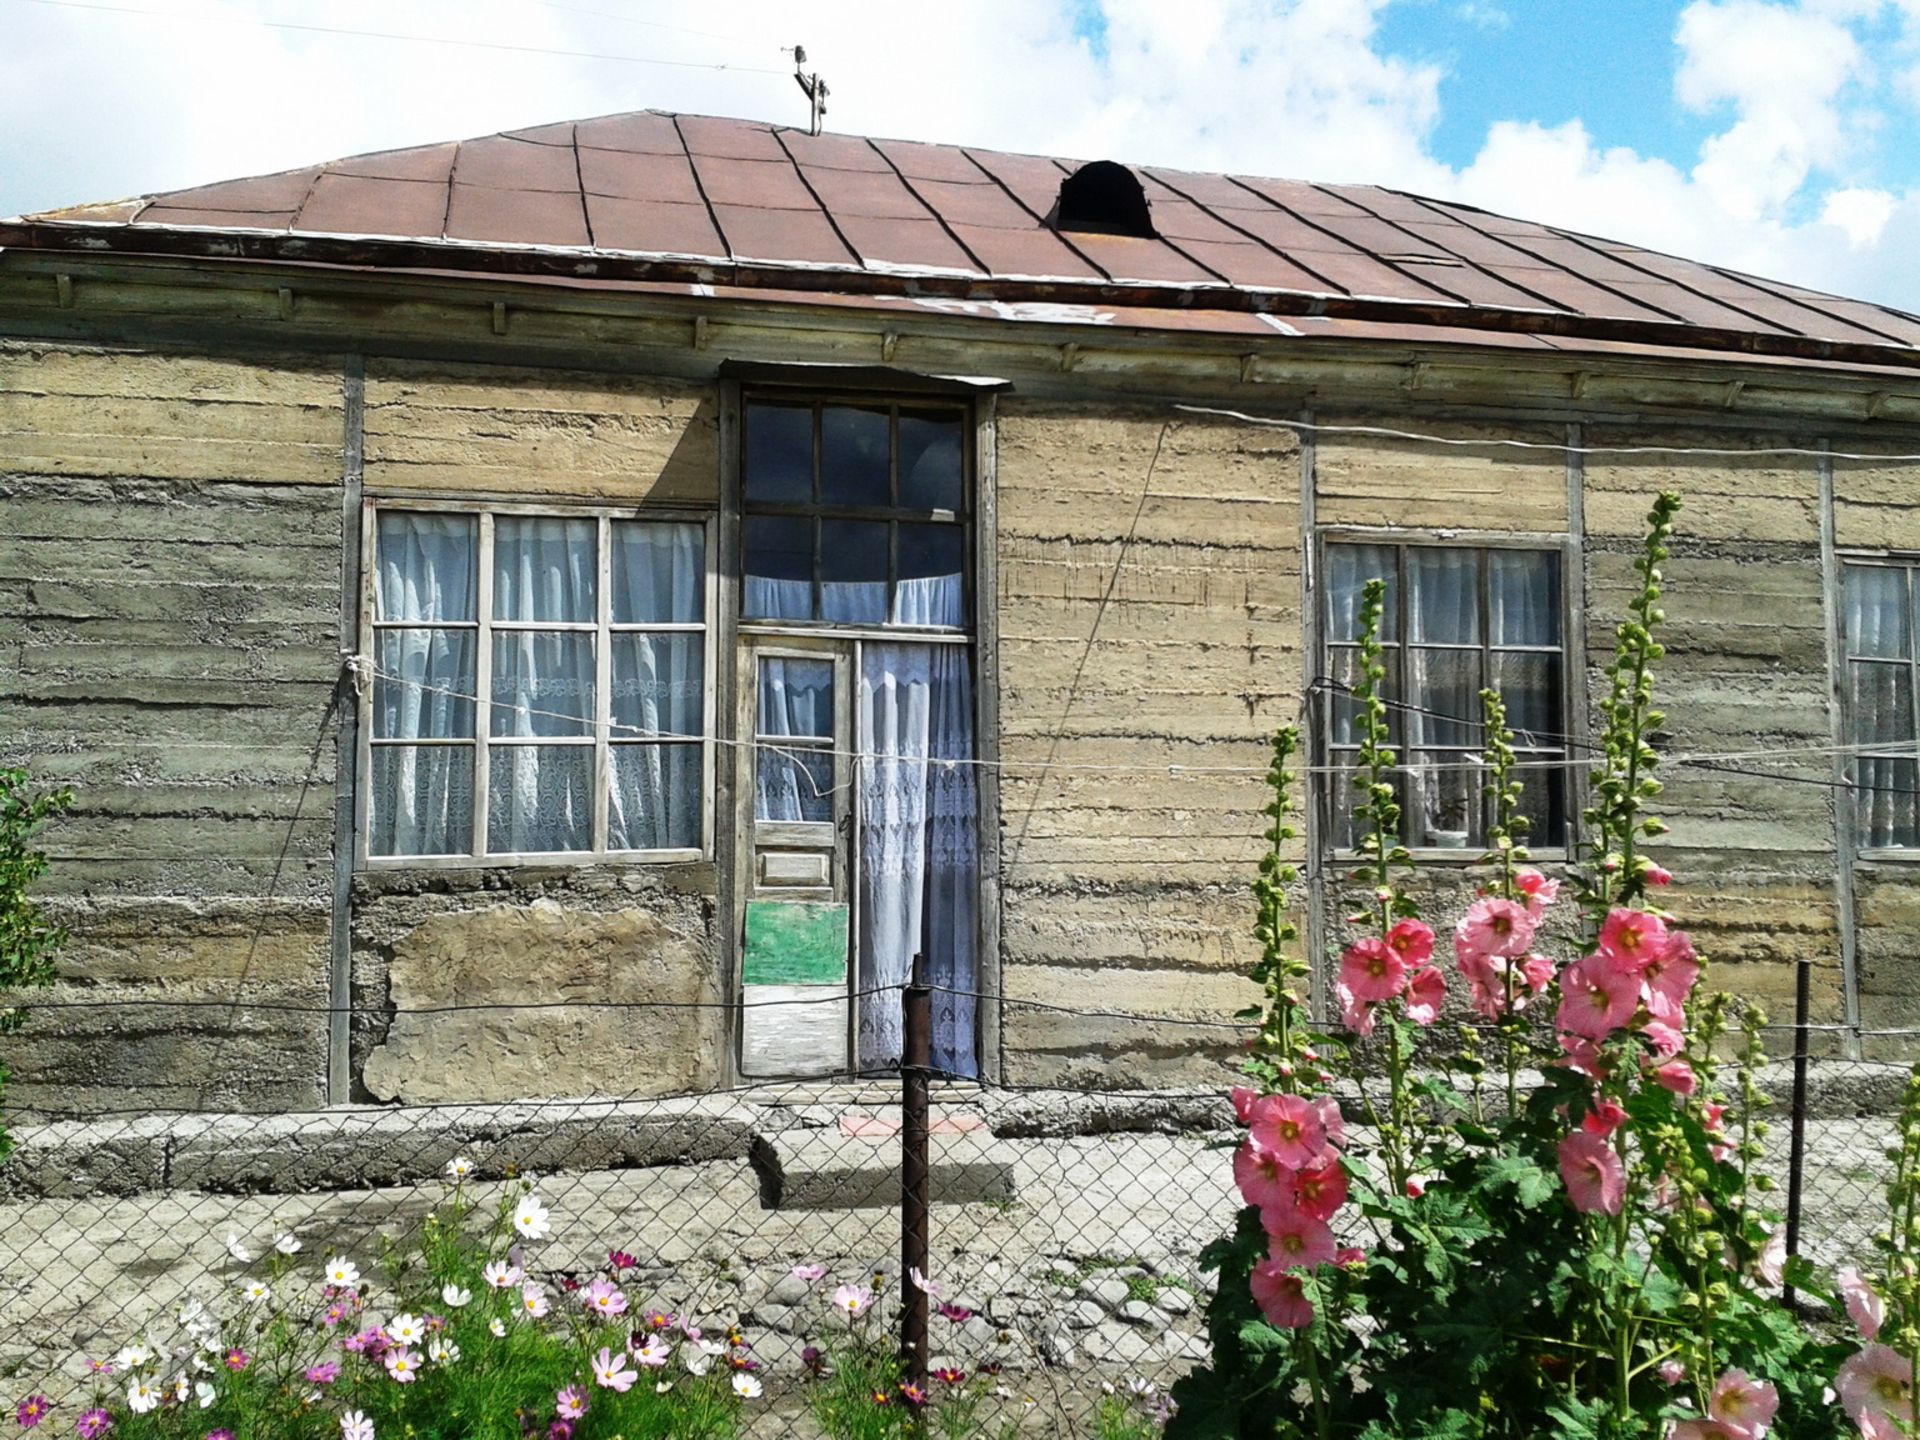 HOUSE IN 1 ACRE IN SOTK, ARMENIA - Image 5 of 35